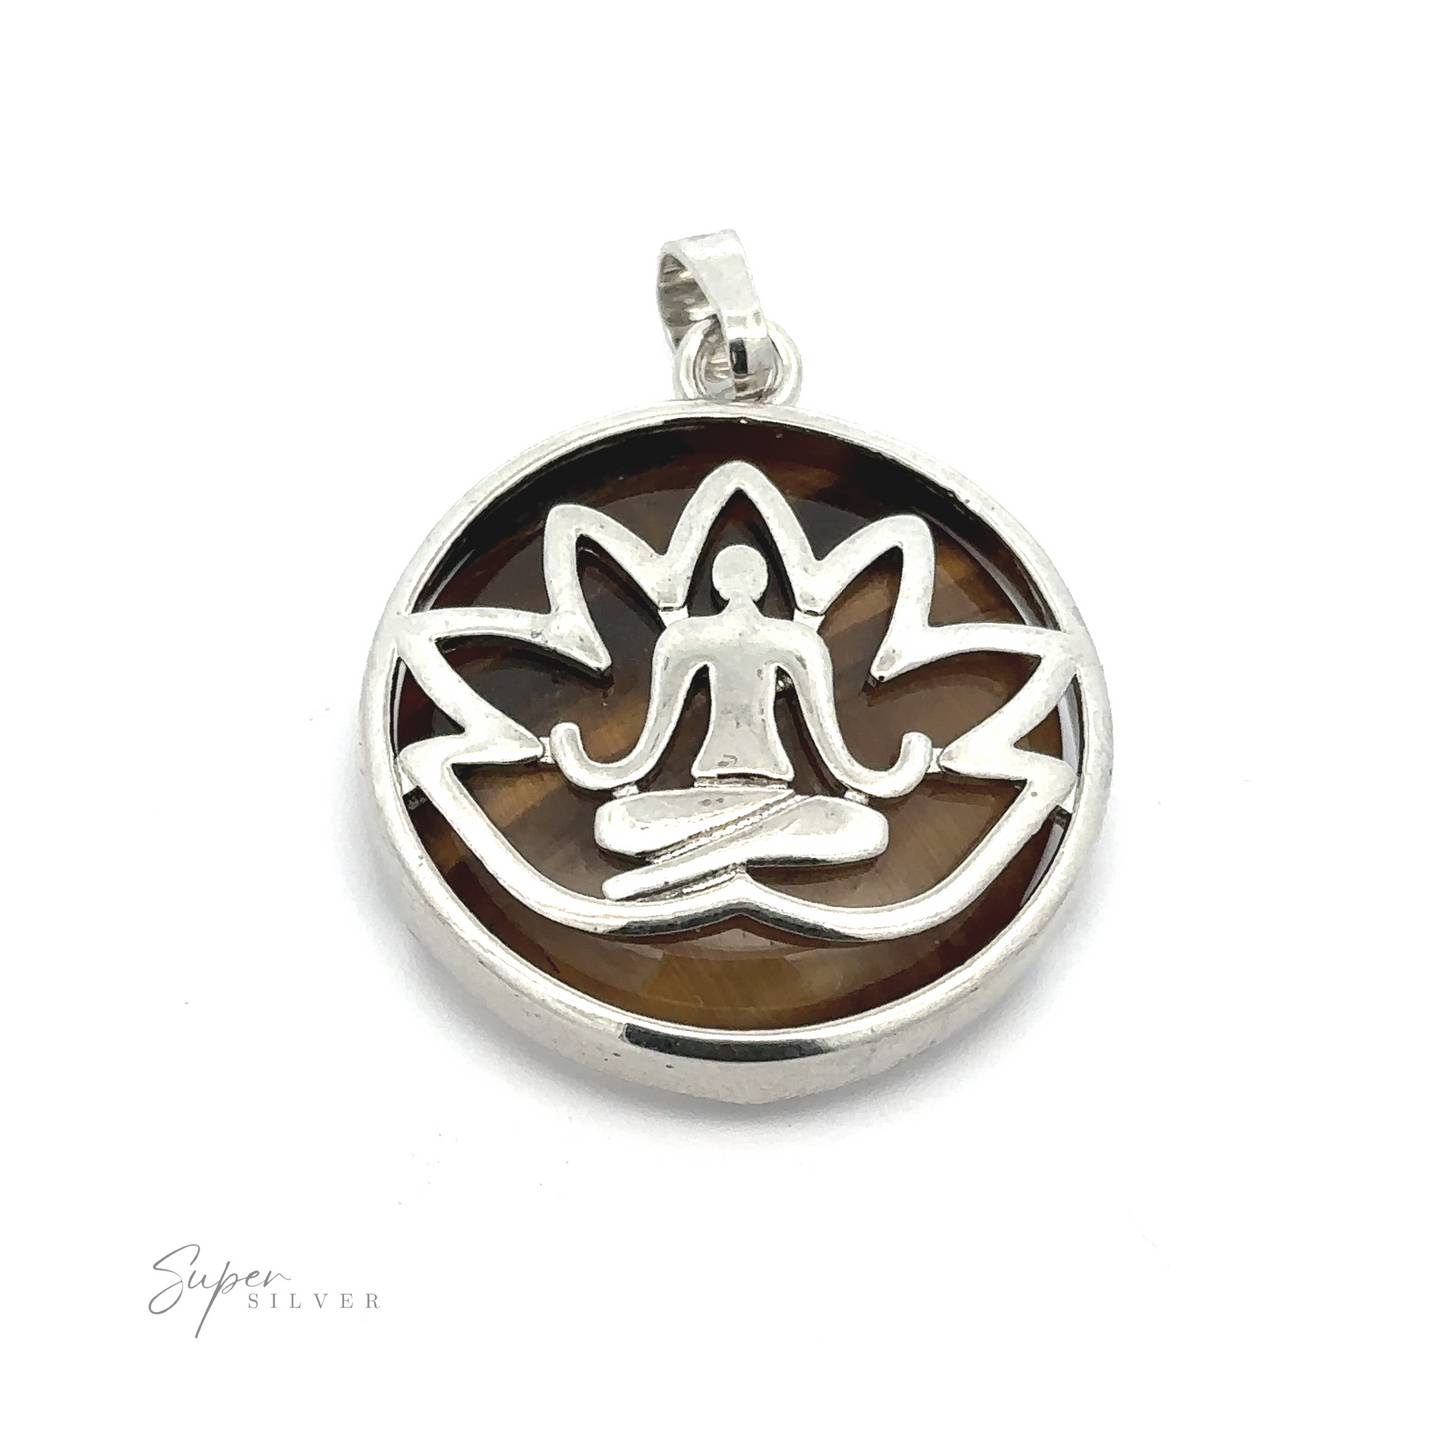 
                  
                    A Silver Plated Lotus Meditation Pendant with Gemstone featuring a person in a lotus position with a lotus flower outline in the background. The pendant has a smooth, polished finish with a ring bail at the top, showcasing an elegant Lotus design.
                  
                